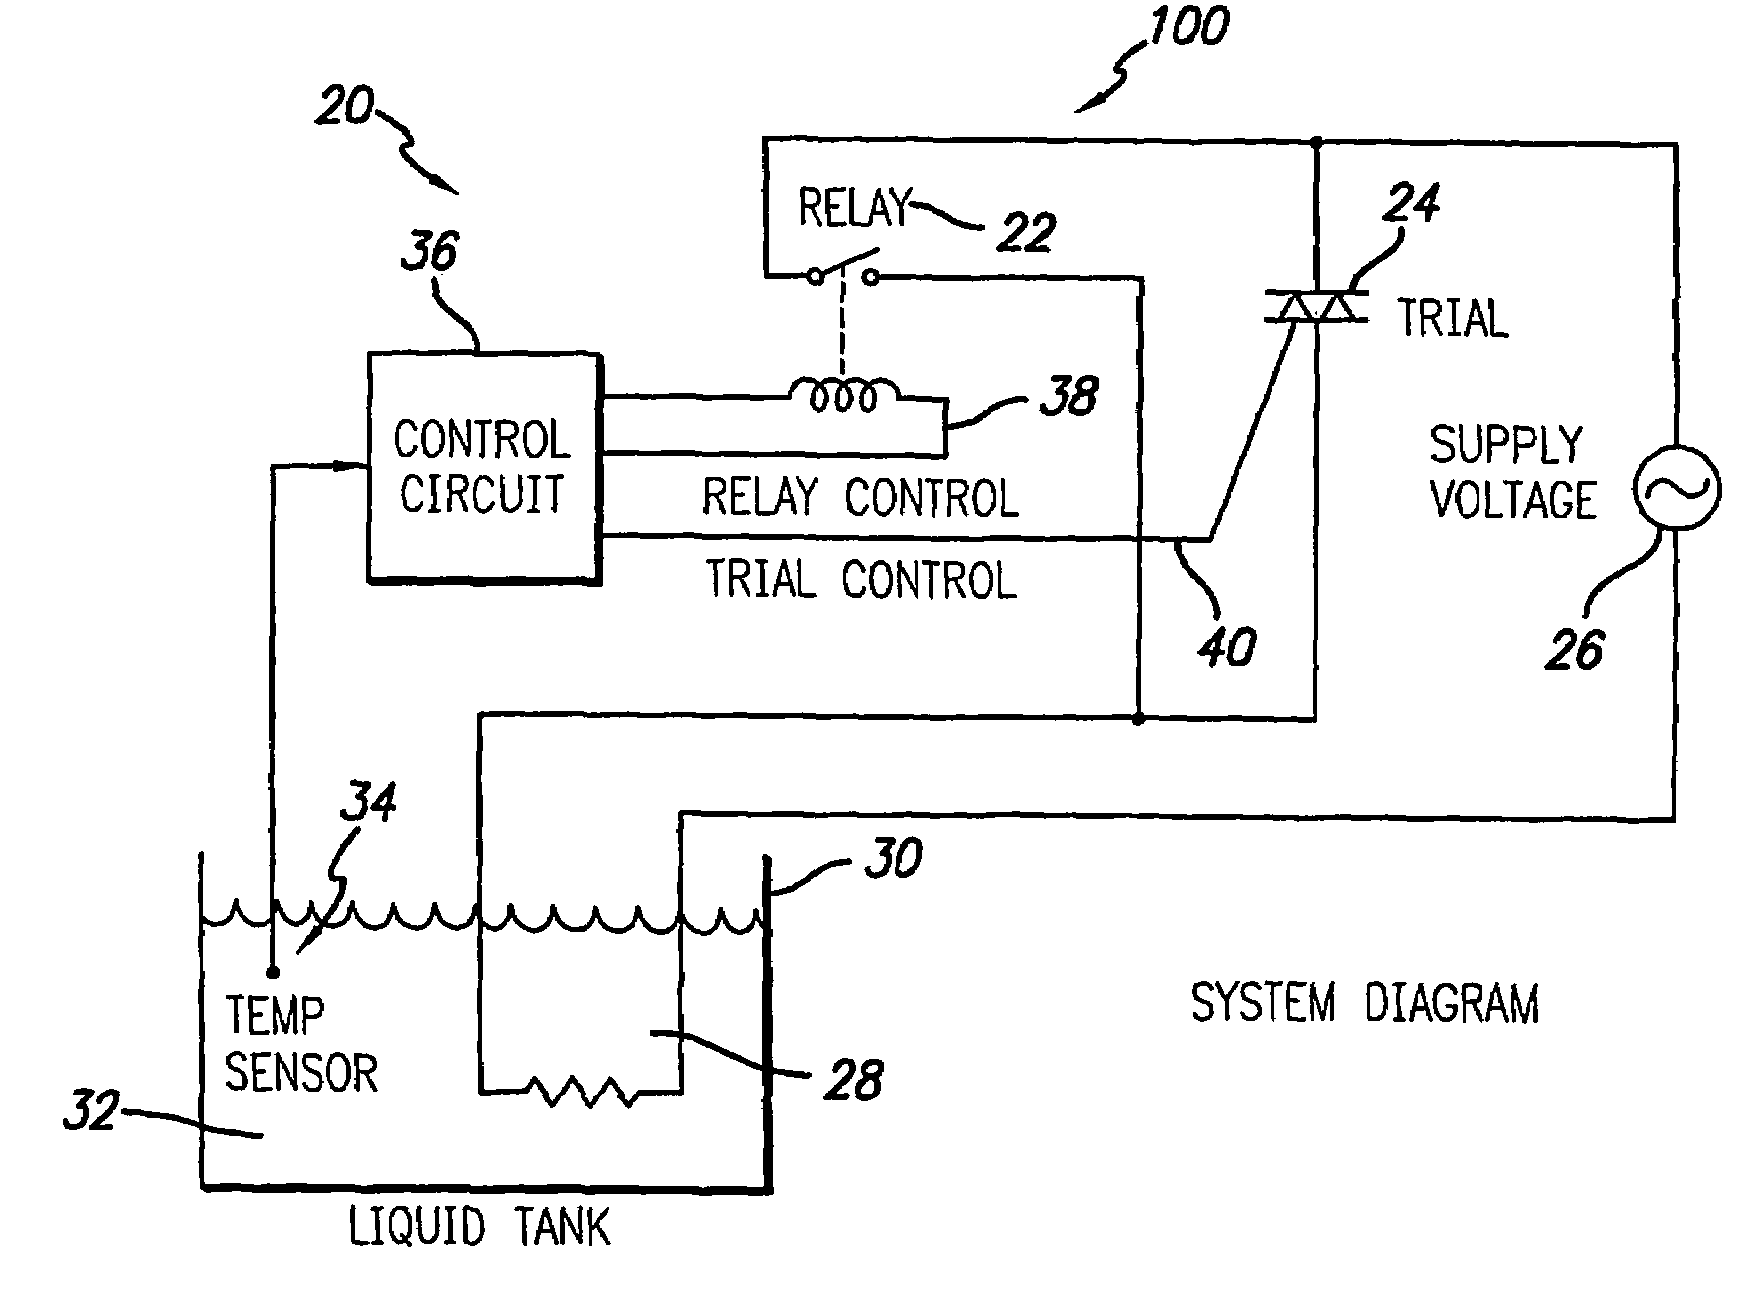 Electronic thermostat for liquid heating apparatus